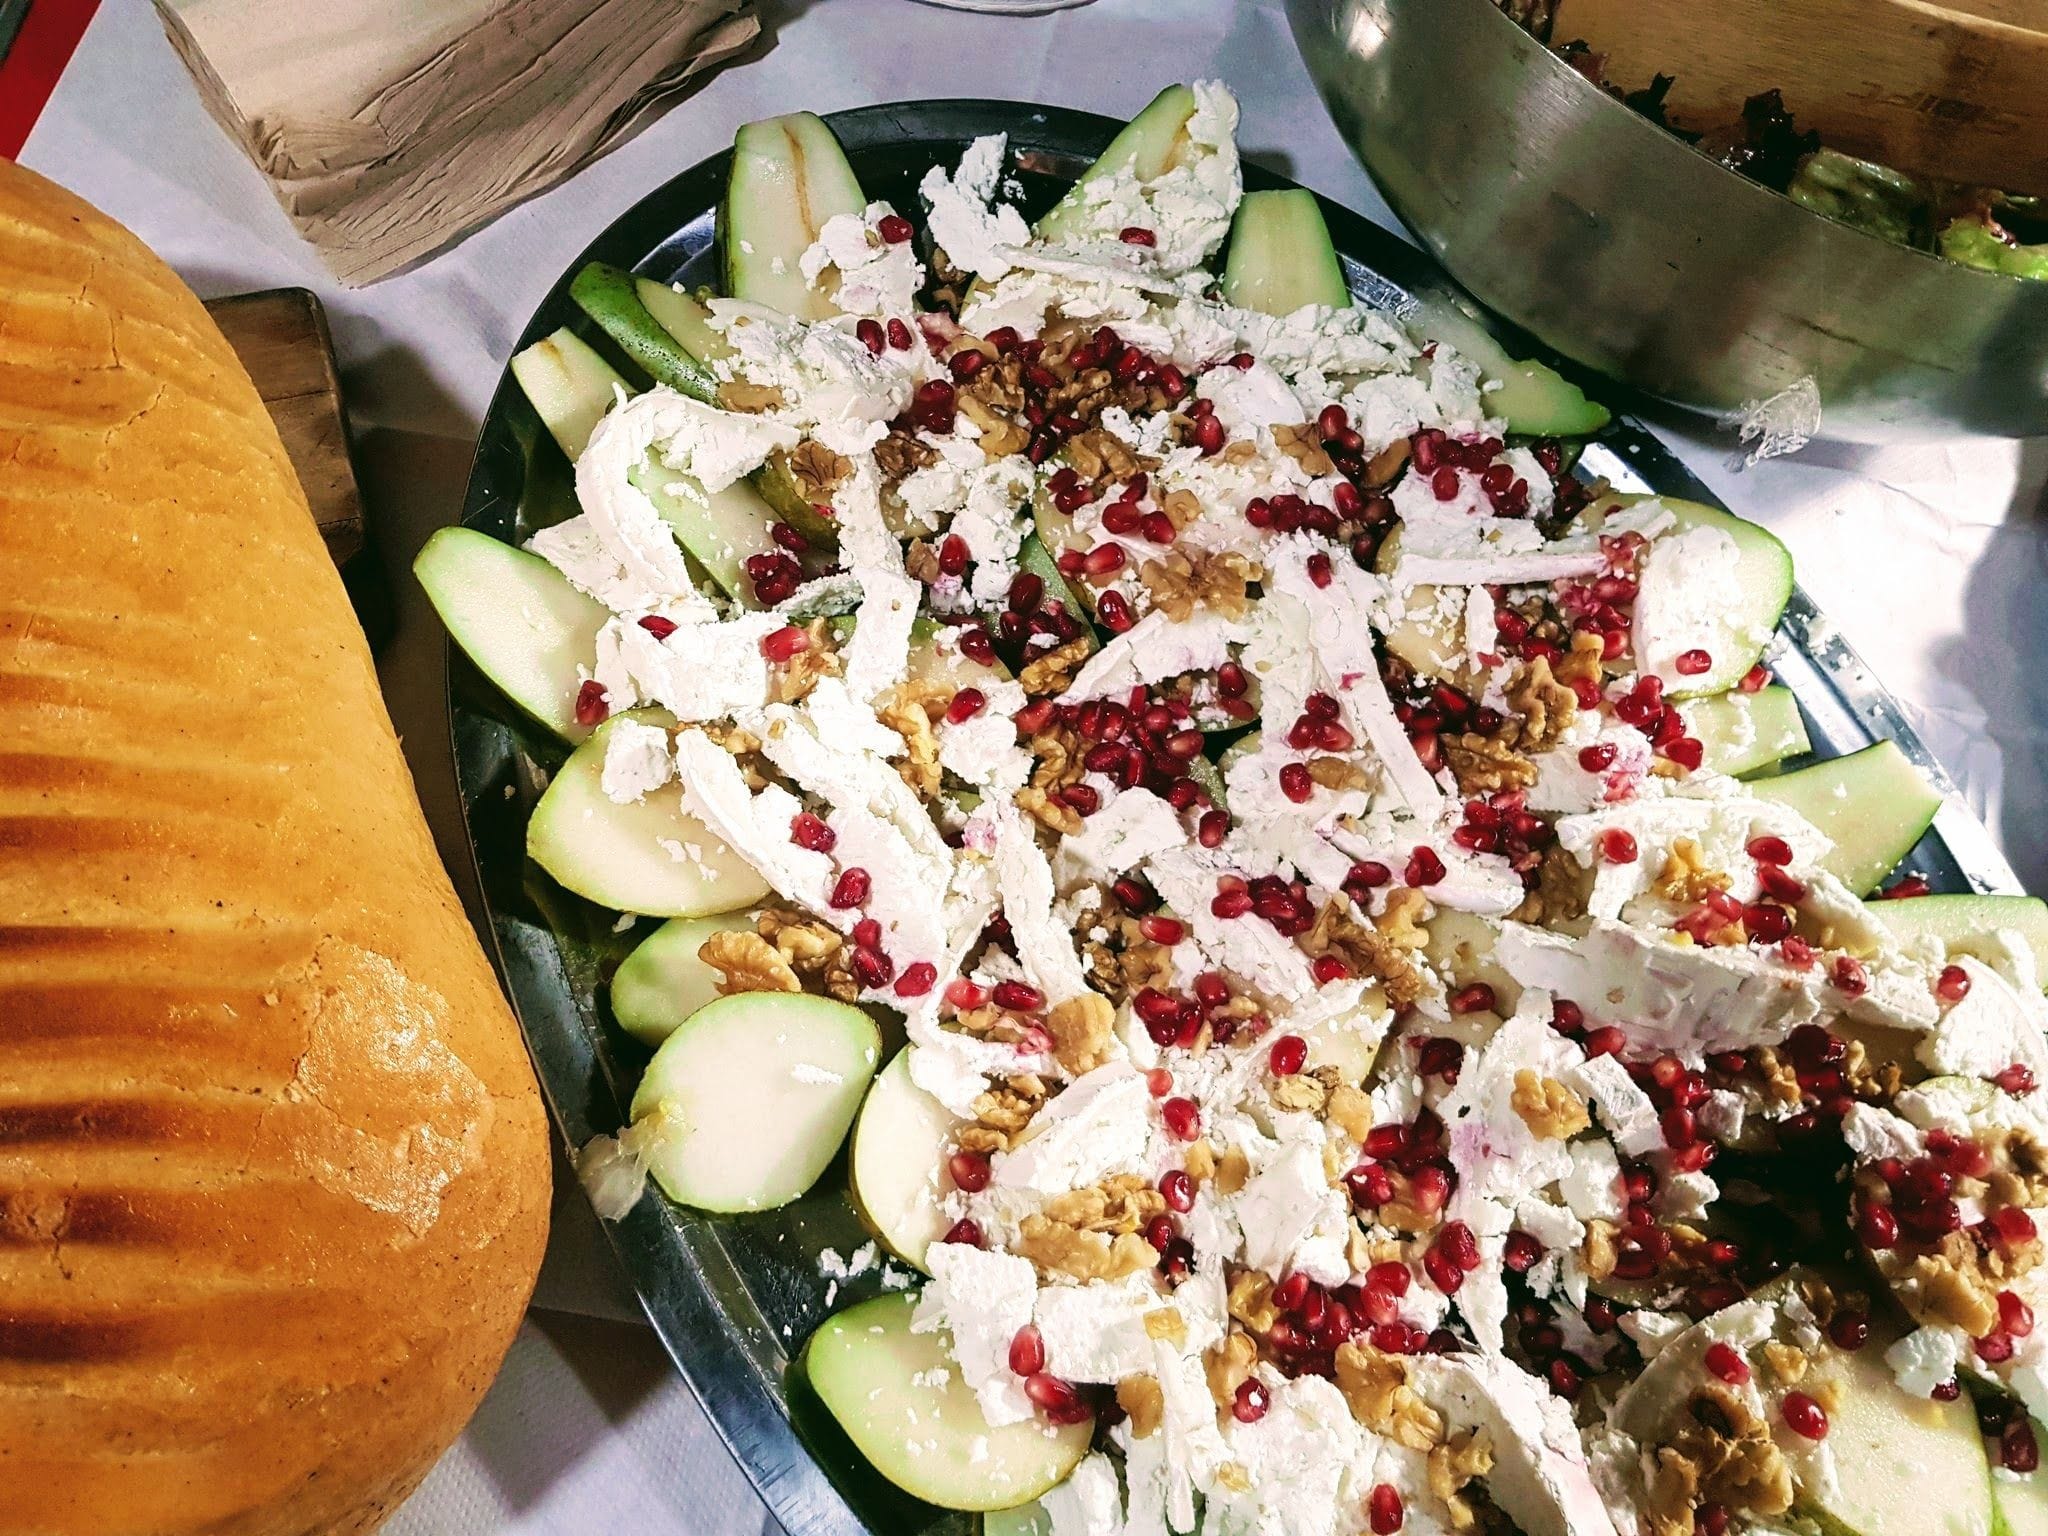 A large platter with slices of pears and goat's cheese garnished with pomegranate seeds. A loaf of bread is next to it